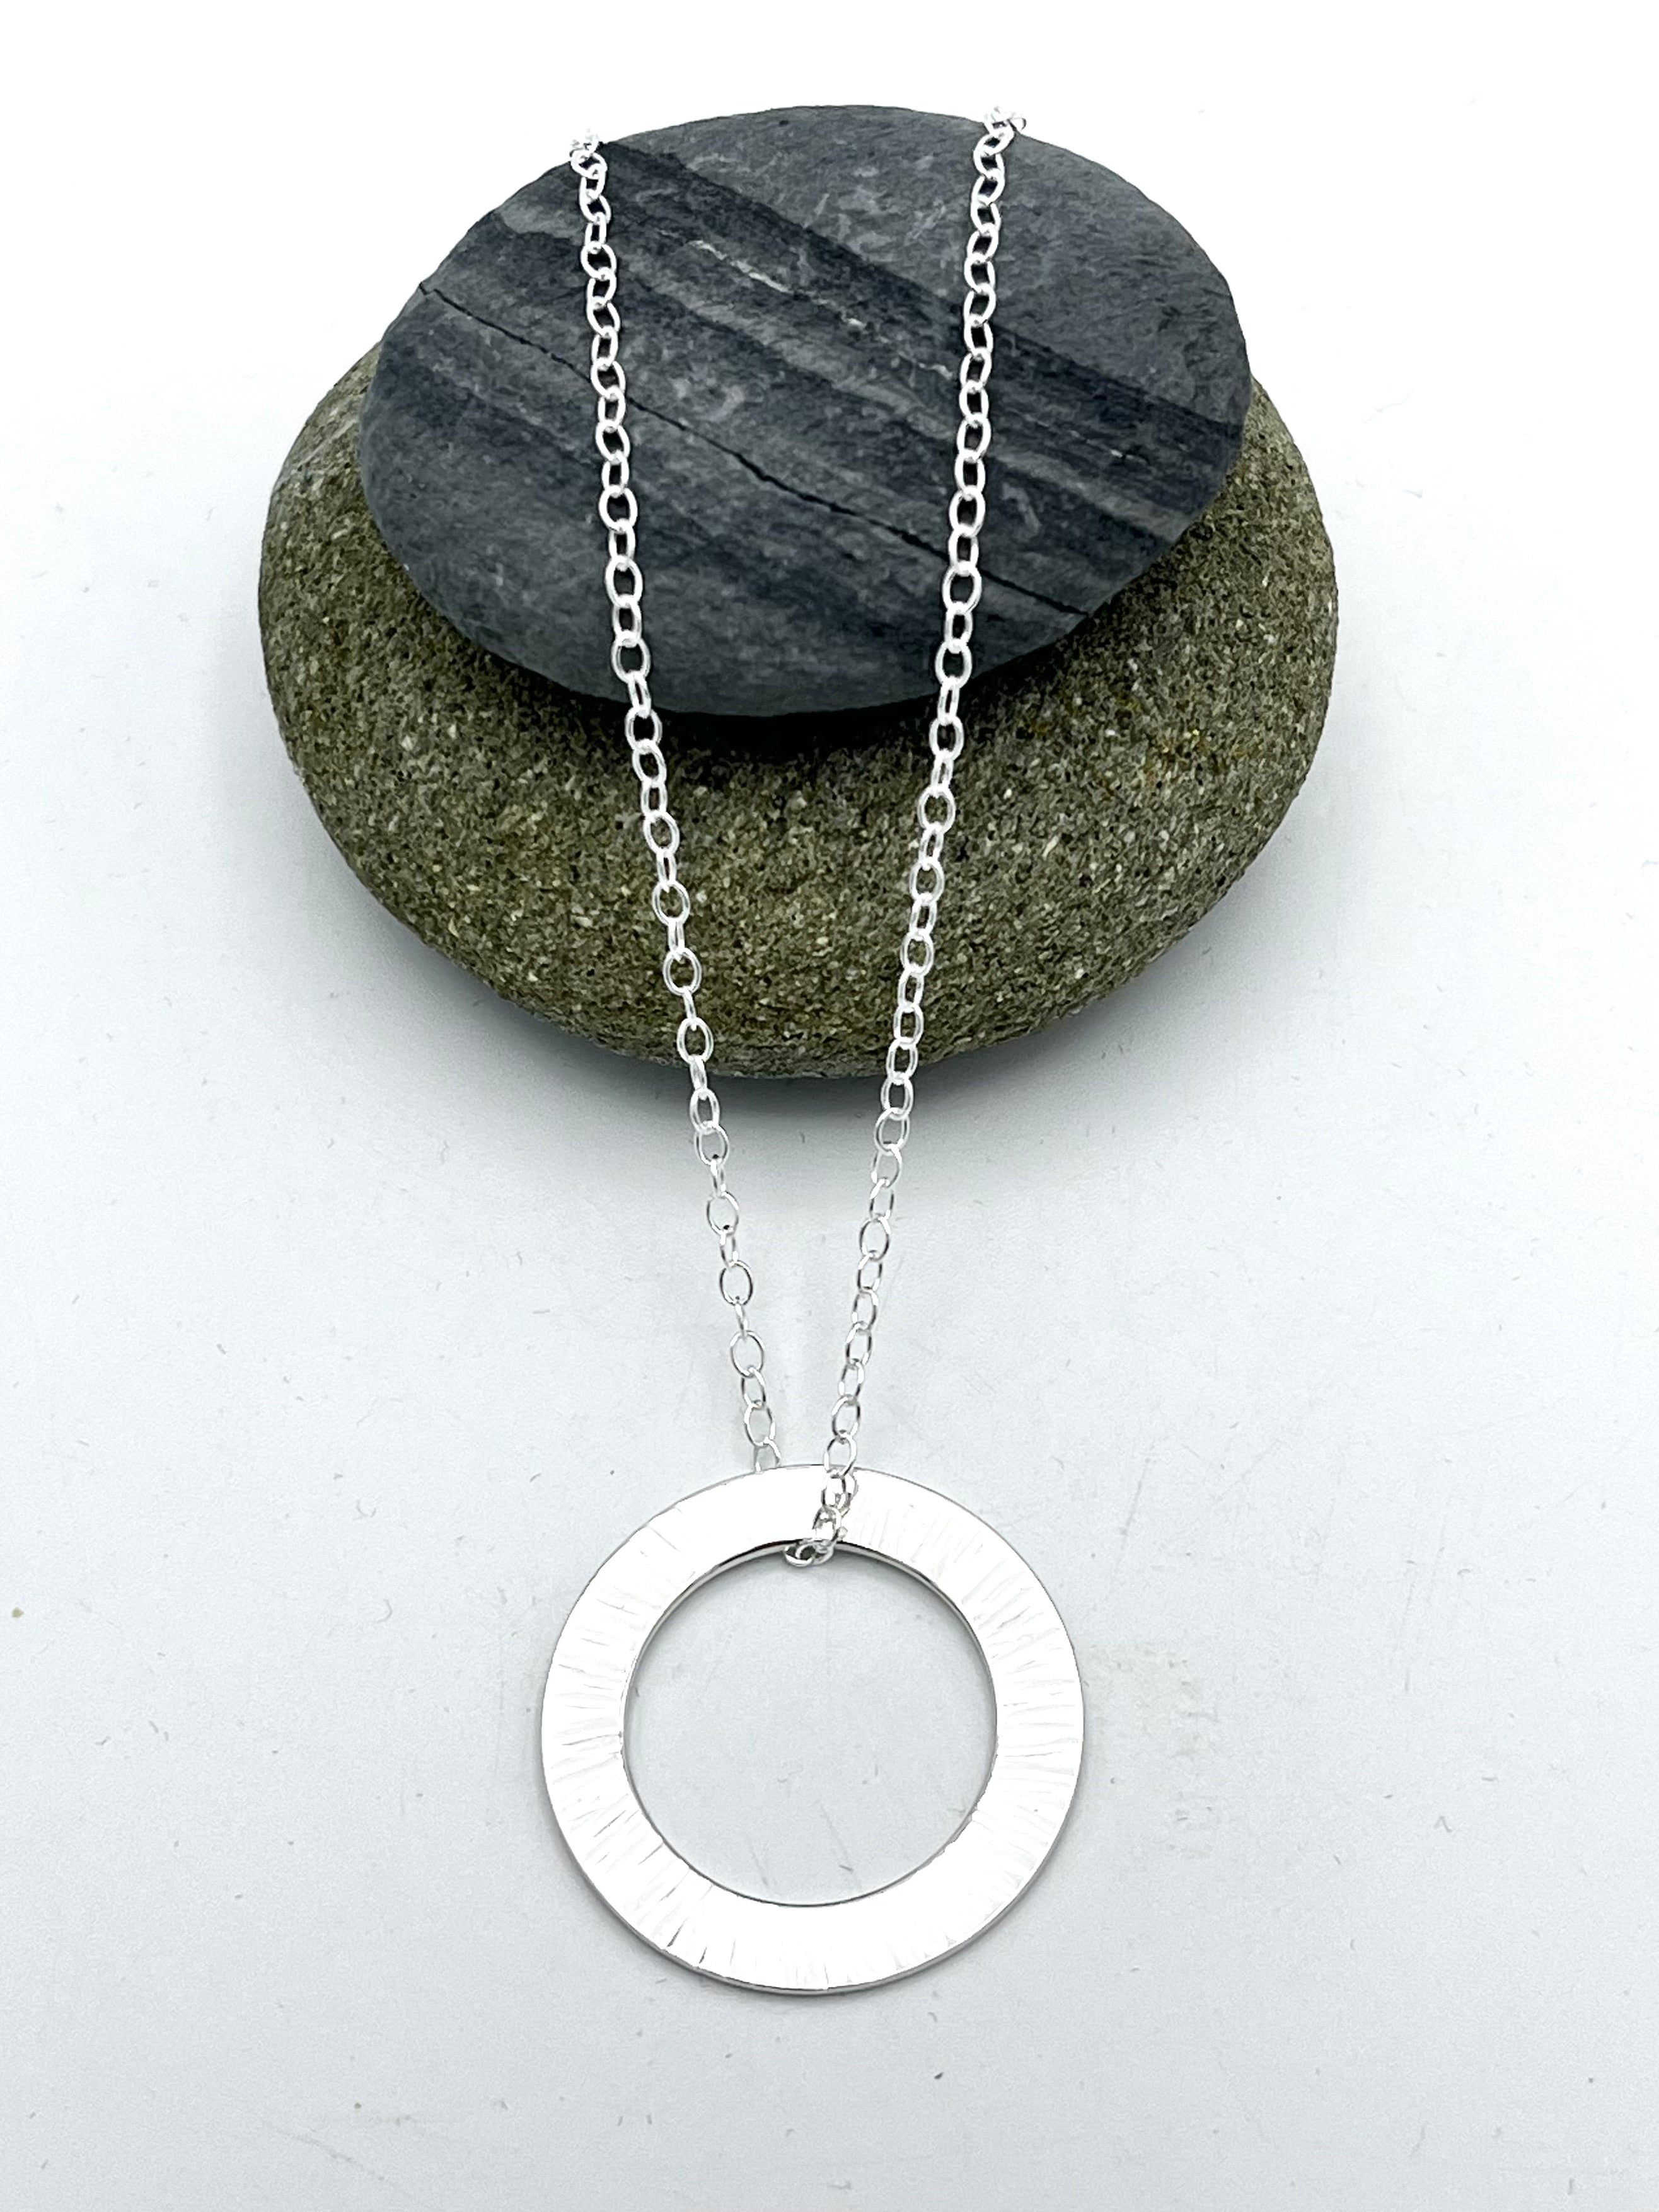 Washer pendant 25mm wide hammered finish on 16" trace chain